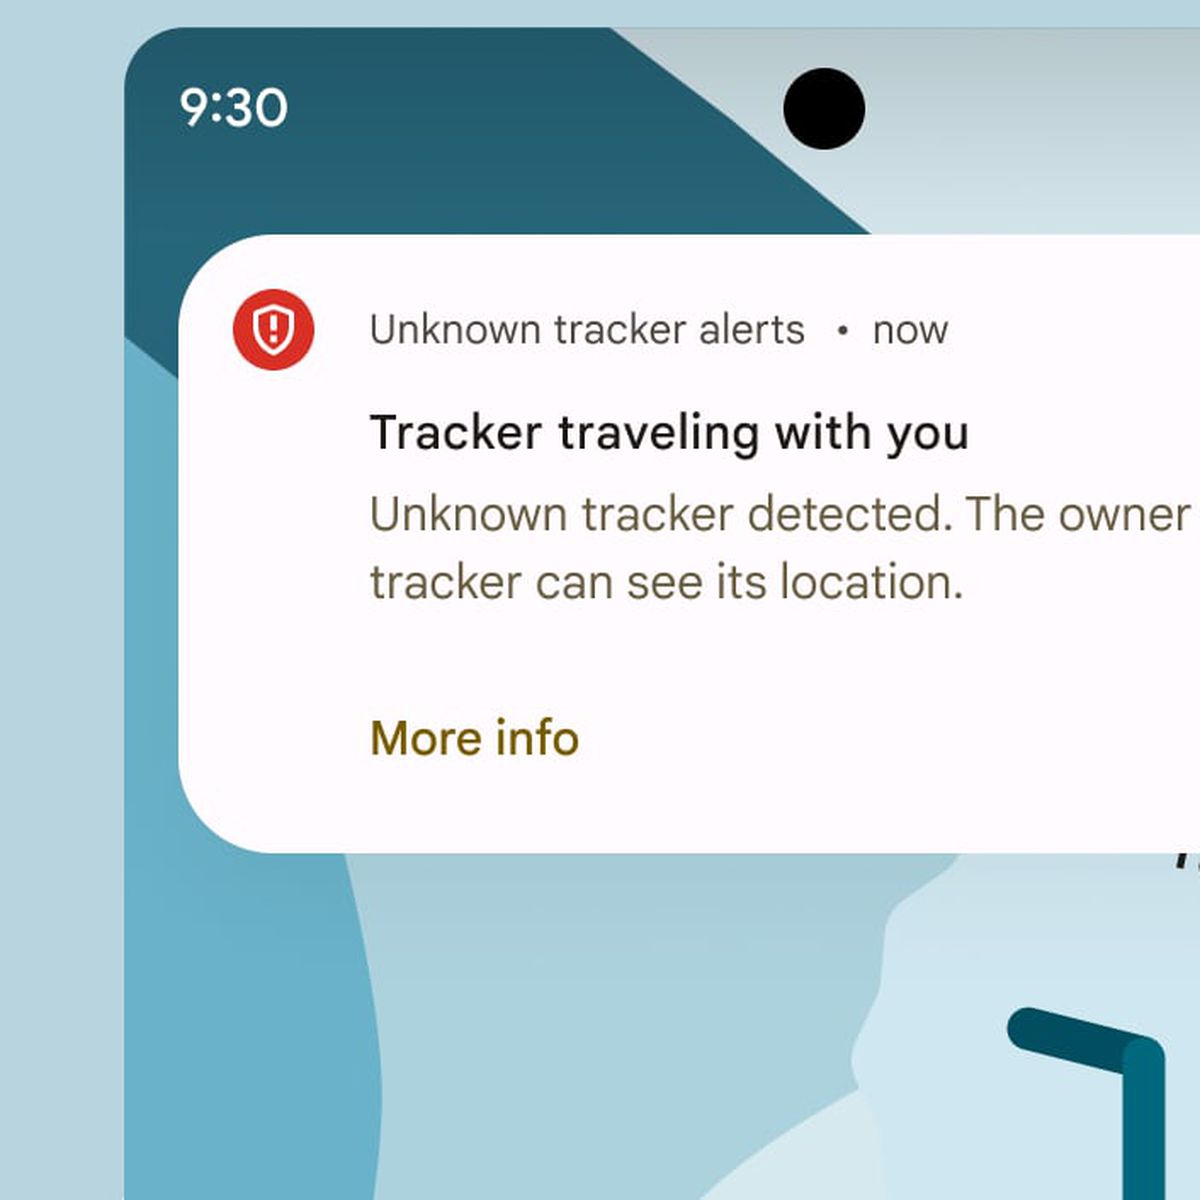 Android will now warn about unknown Bluetooth trackers, like AirTag,  traveling with you